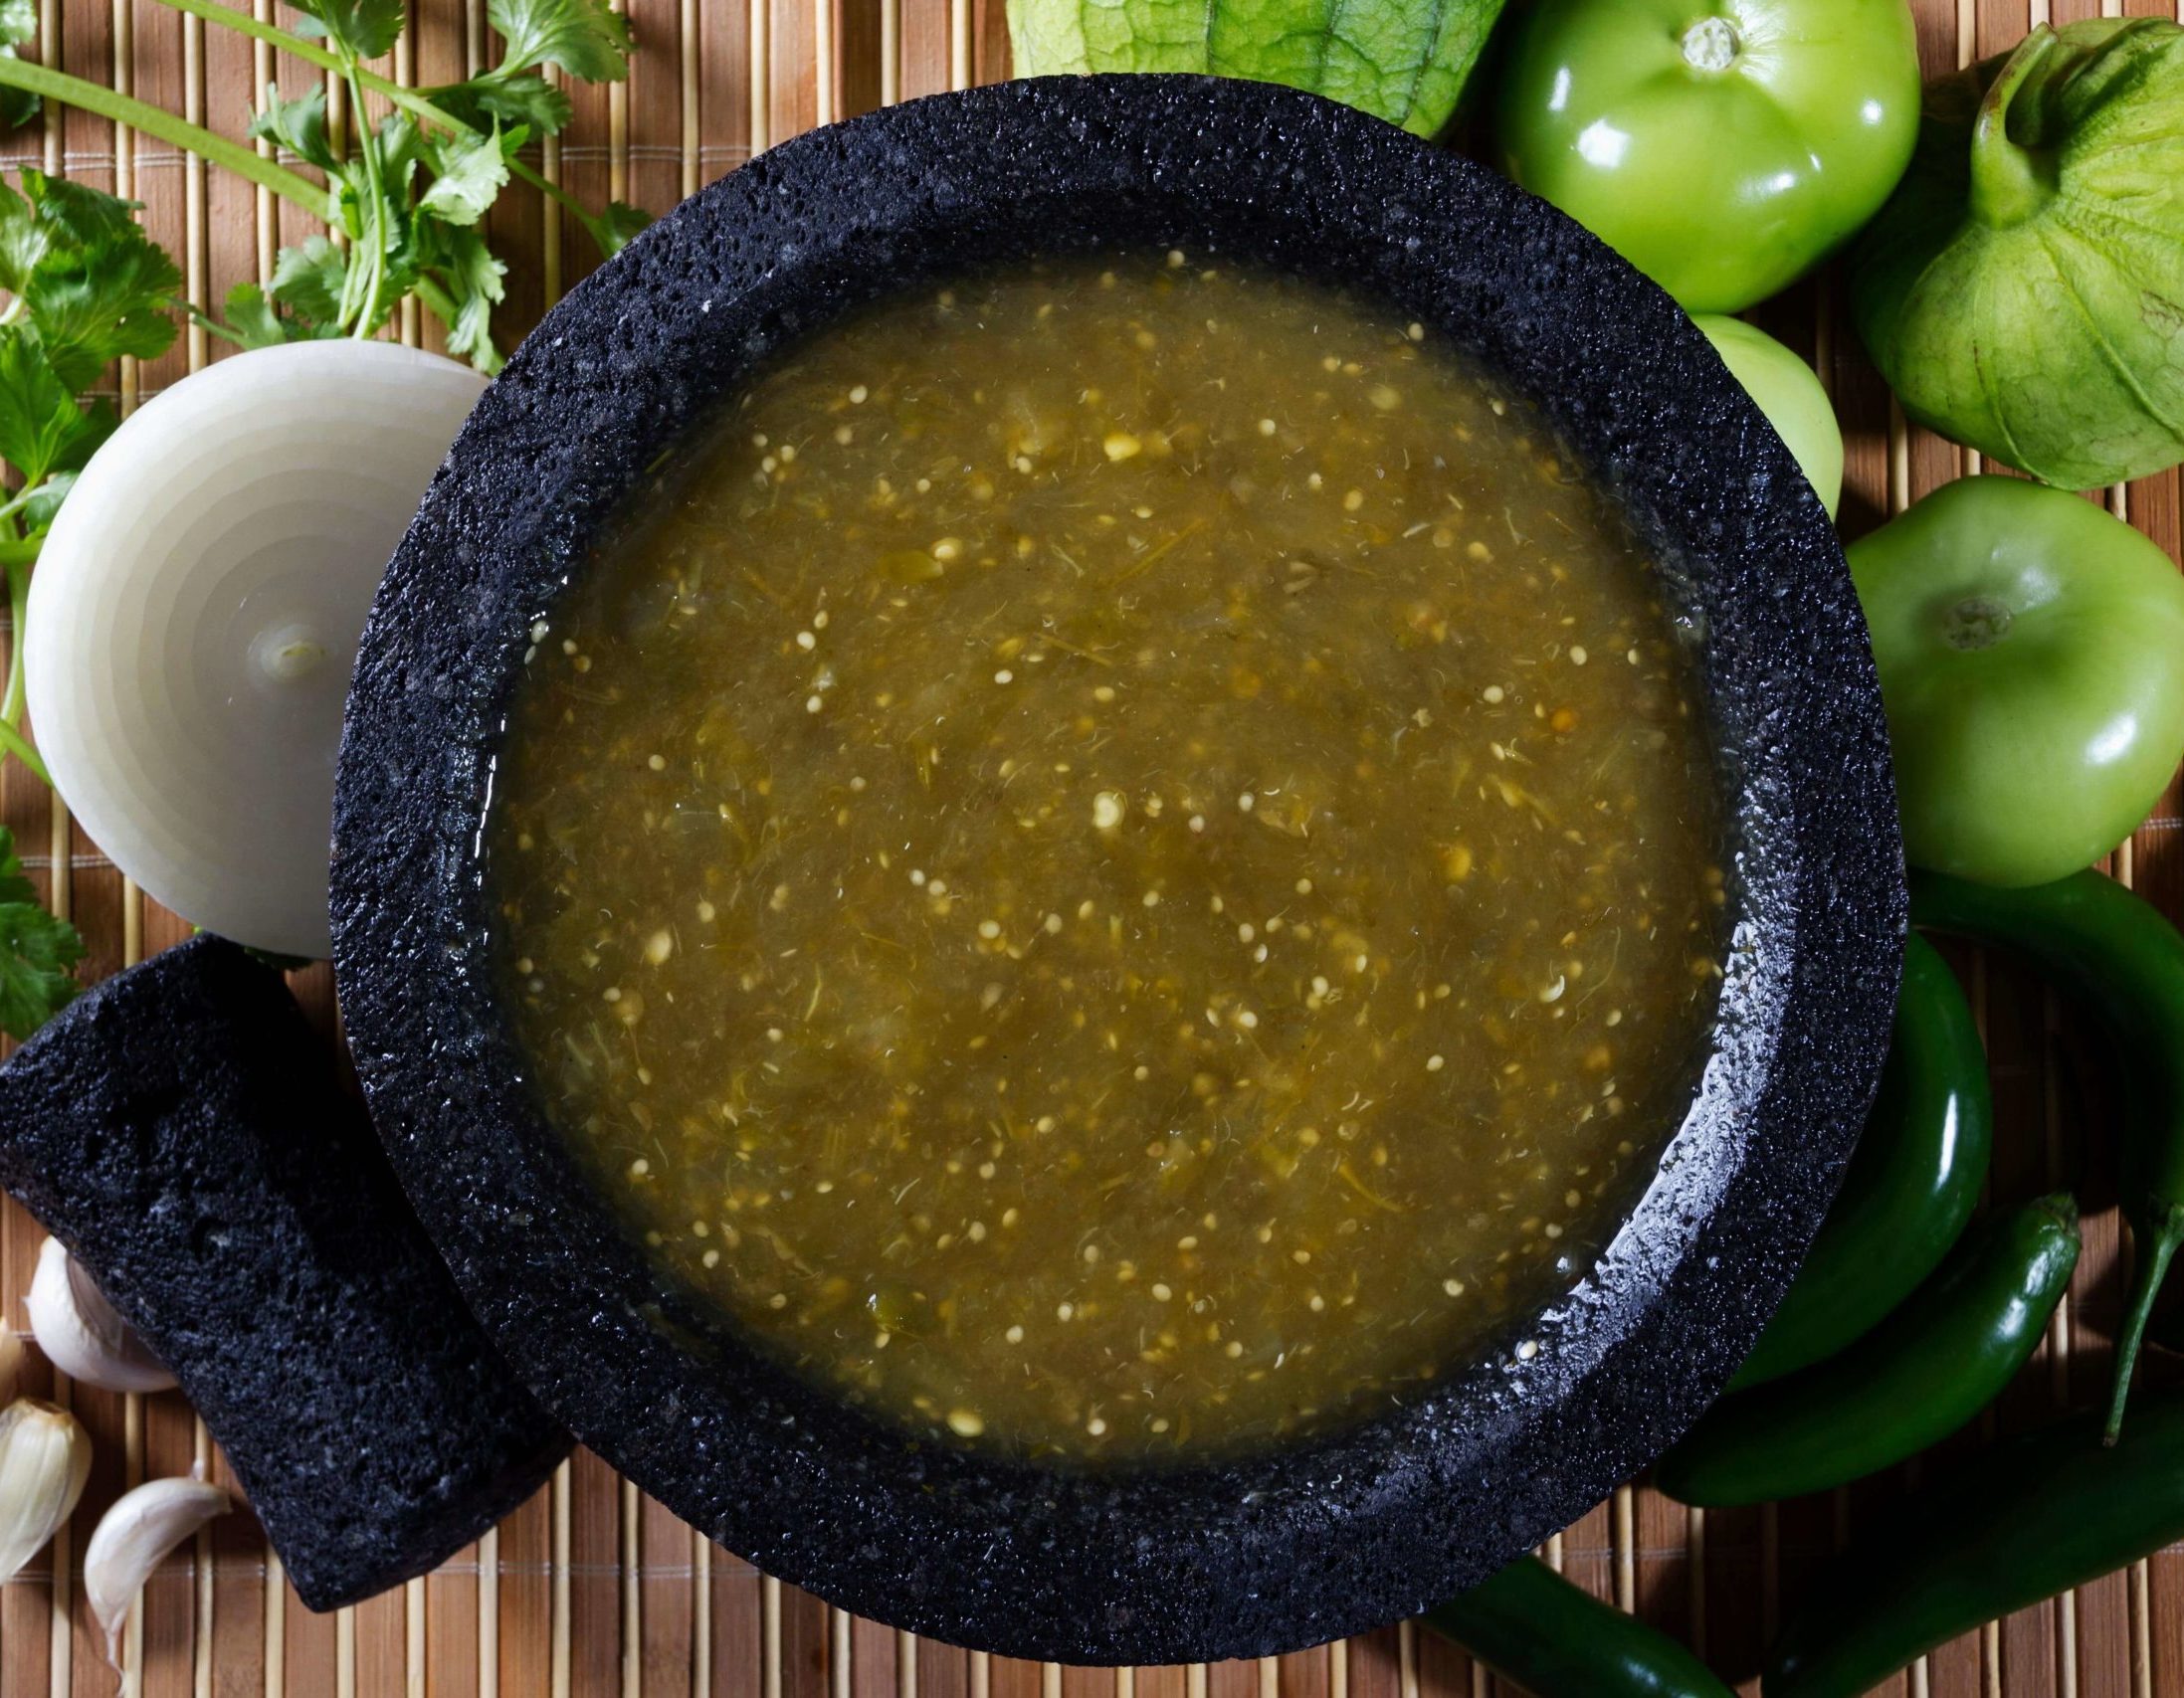 Salsa Verde Recipe Step By Step Instructions